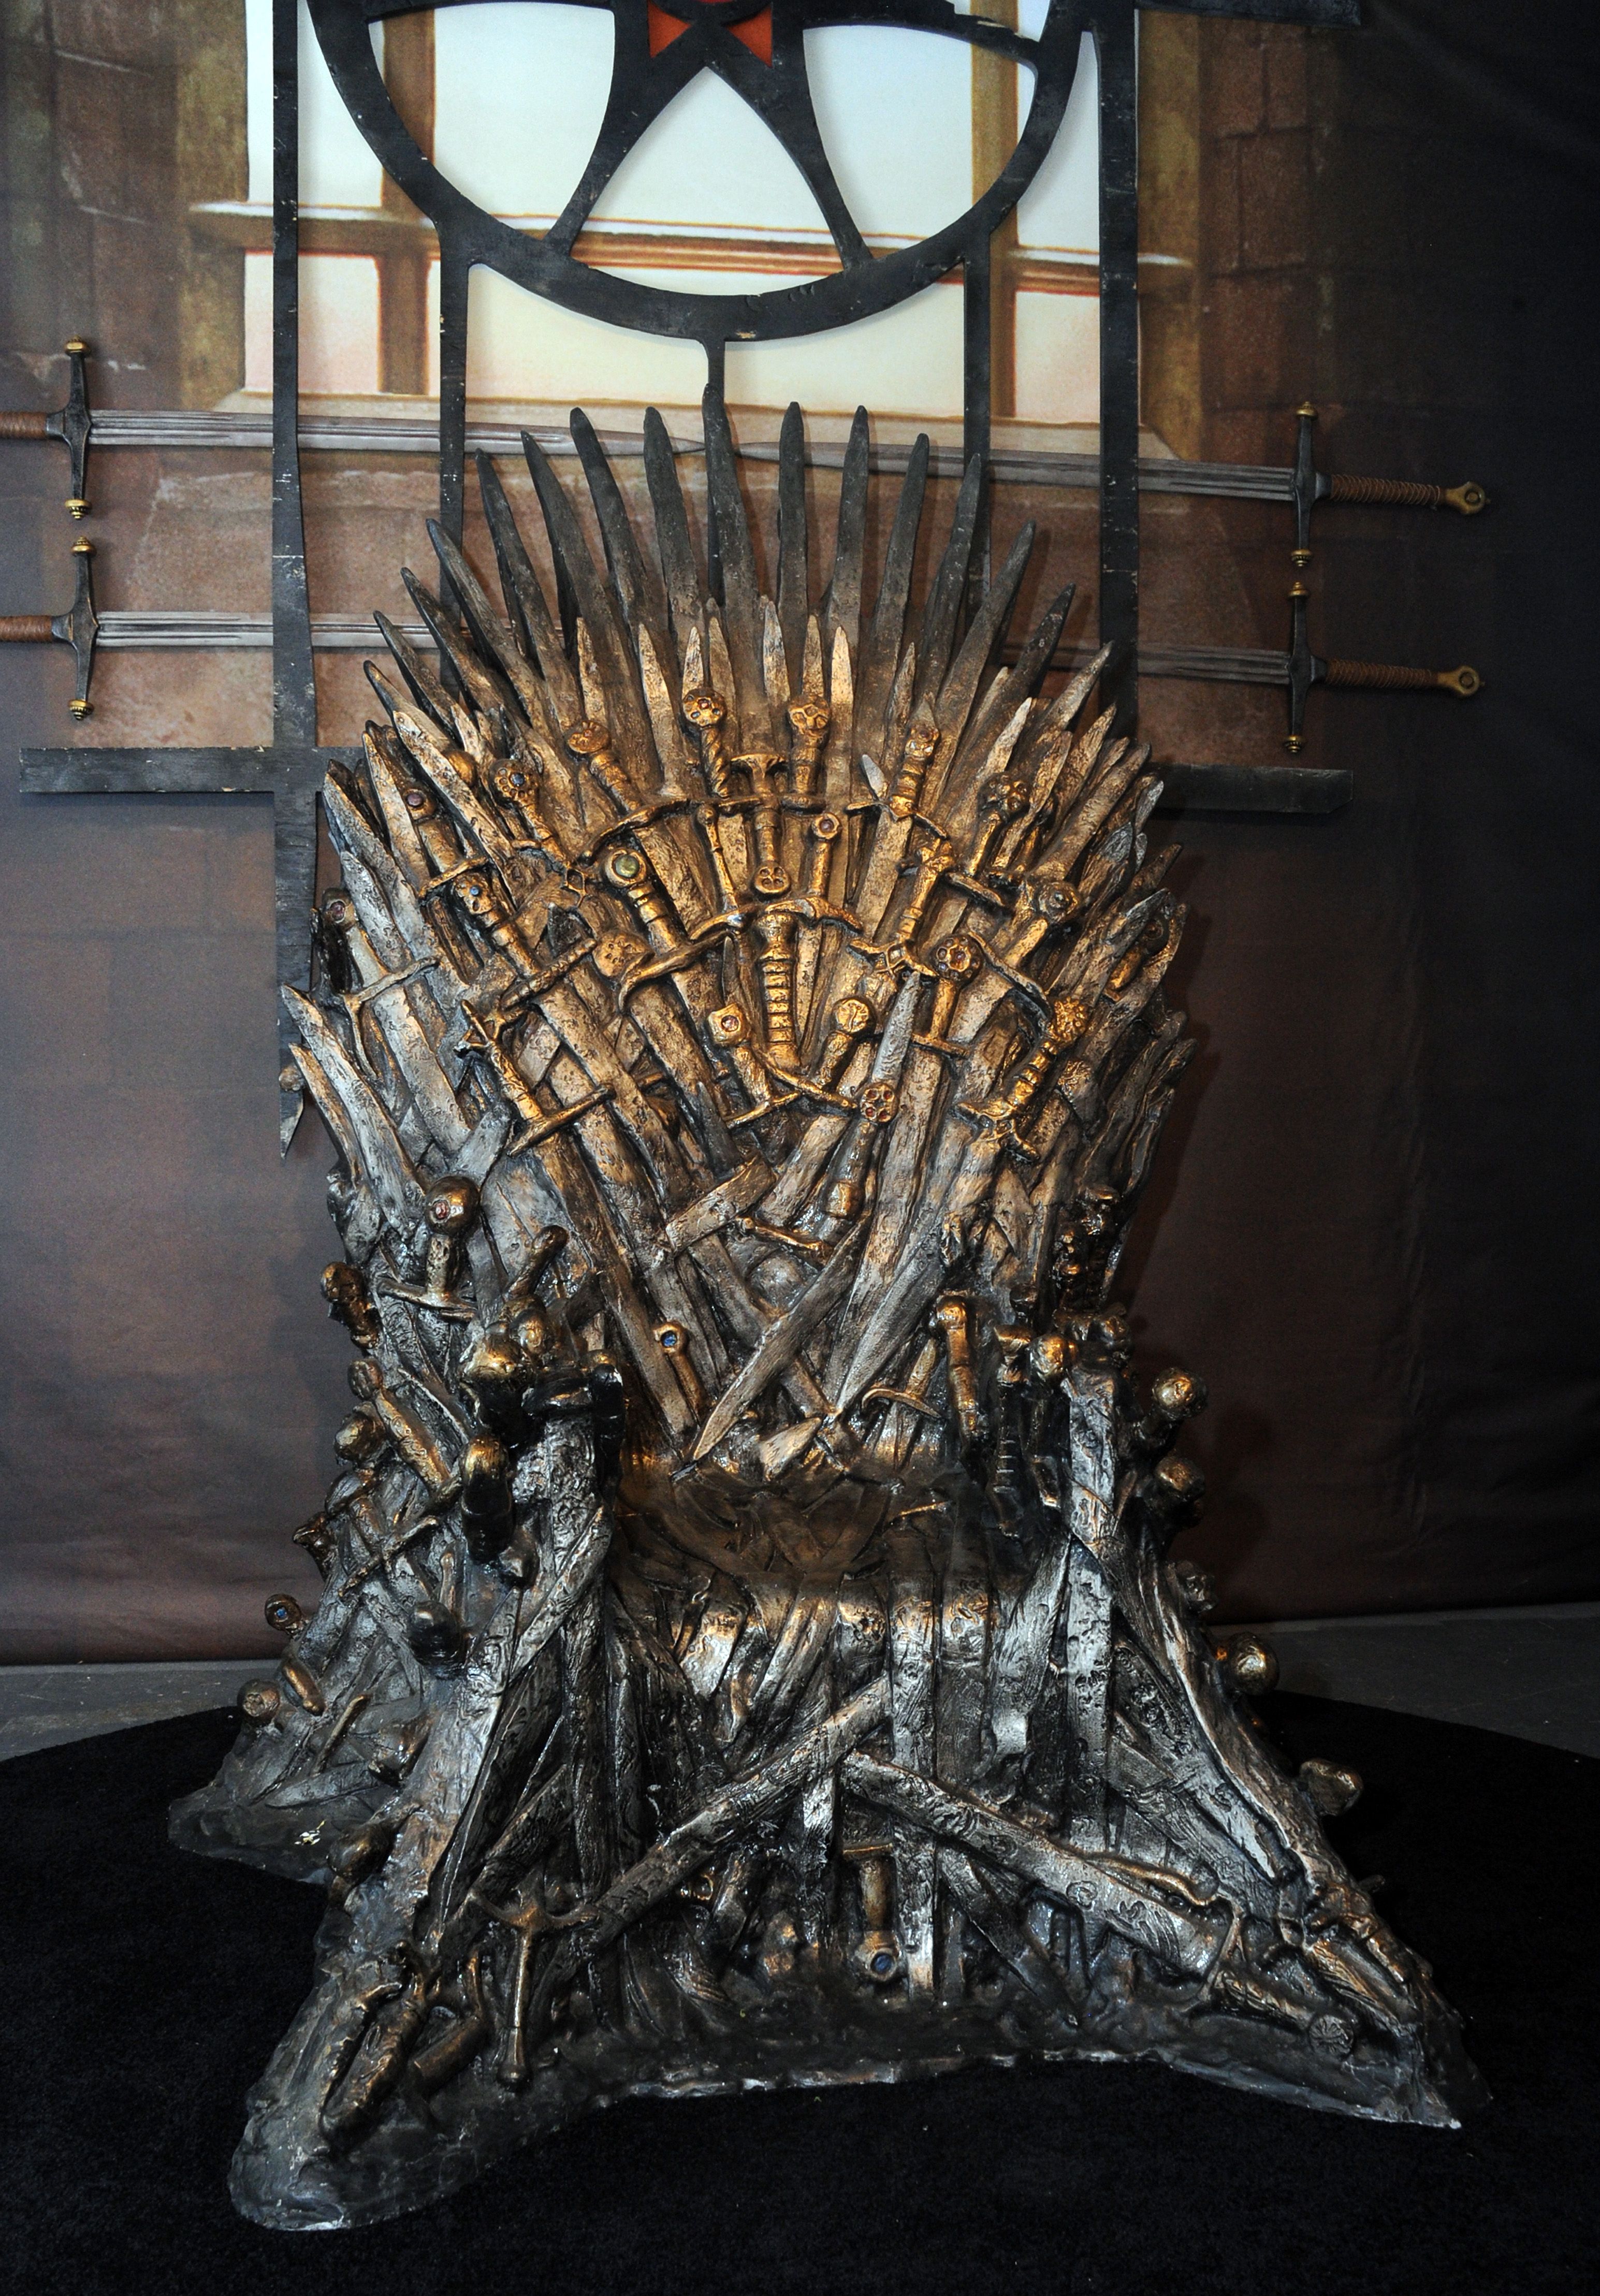 Game Of Thrones Fans Can Turn Their Toilets Into The Iron Throne